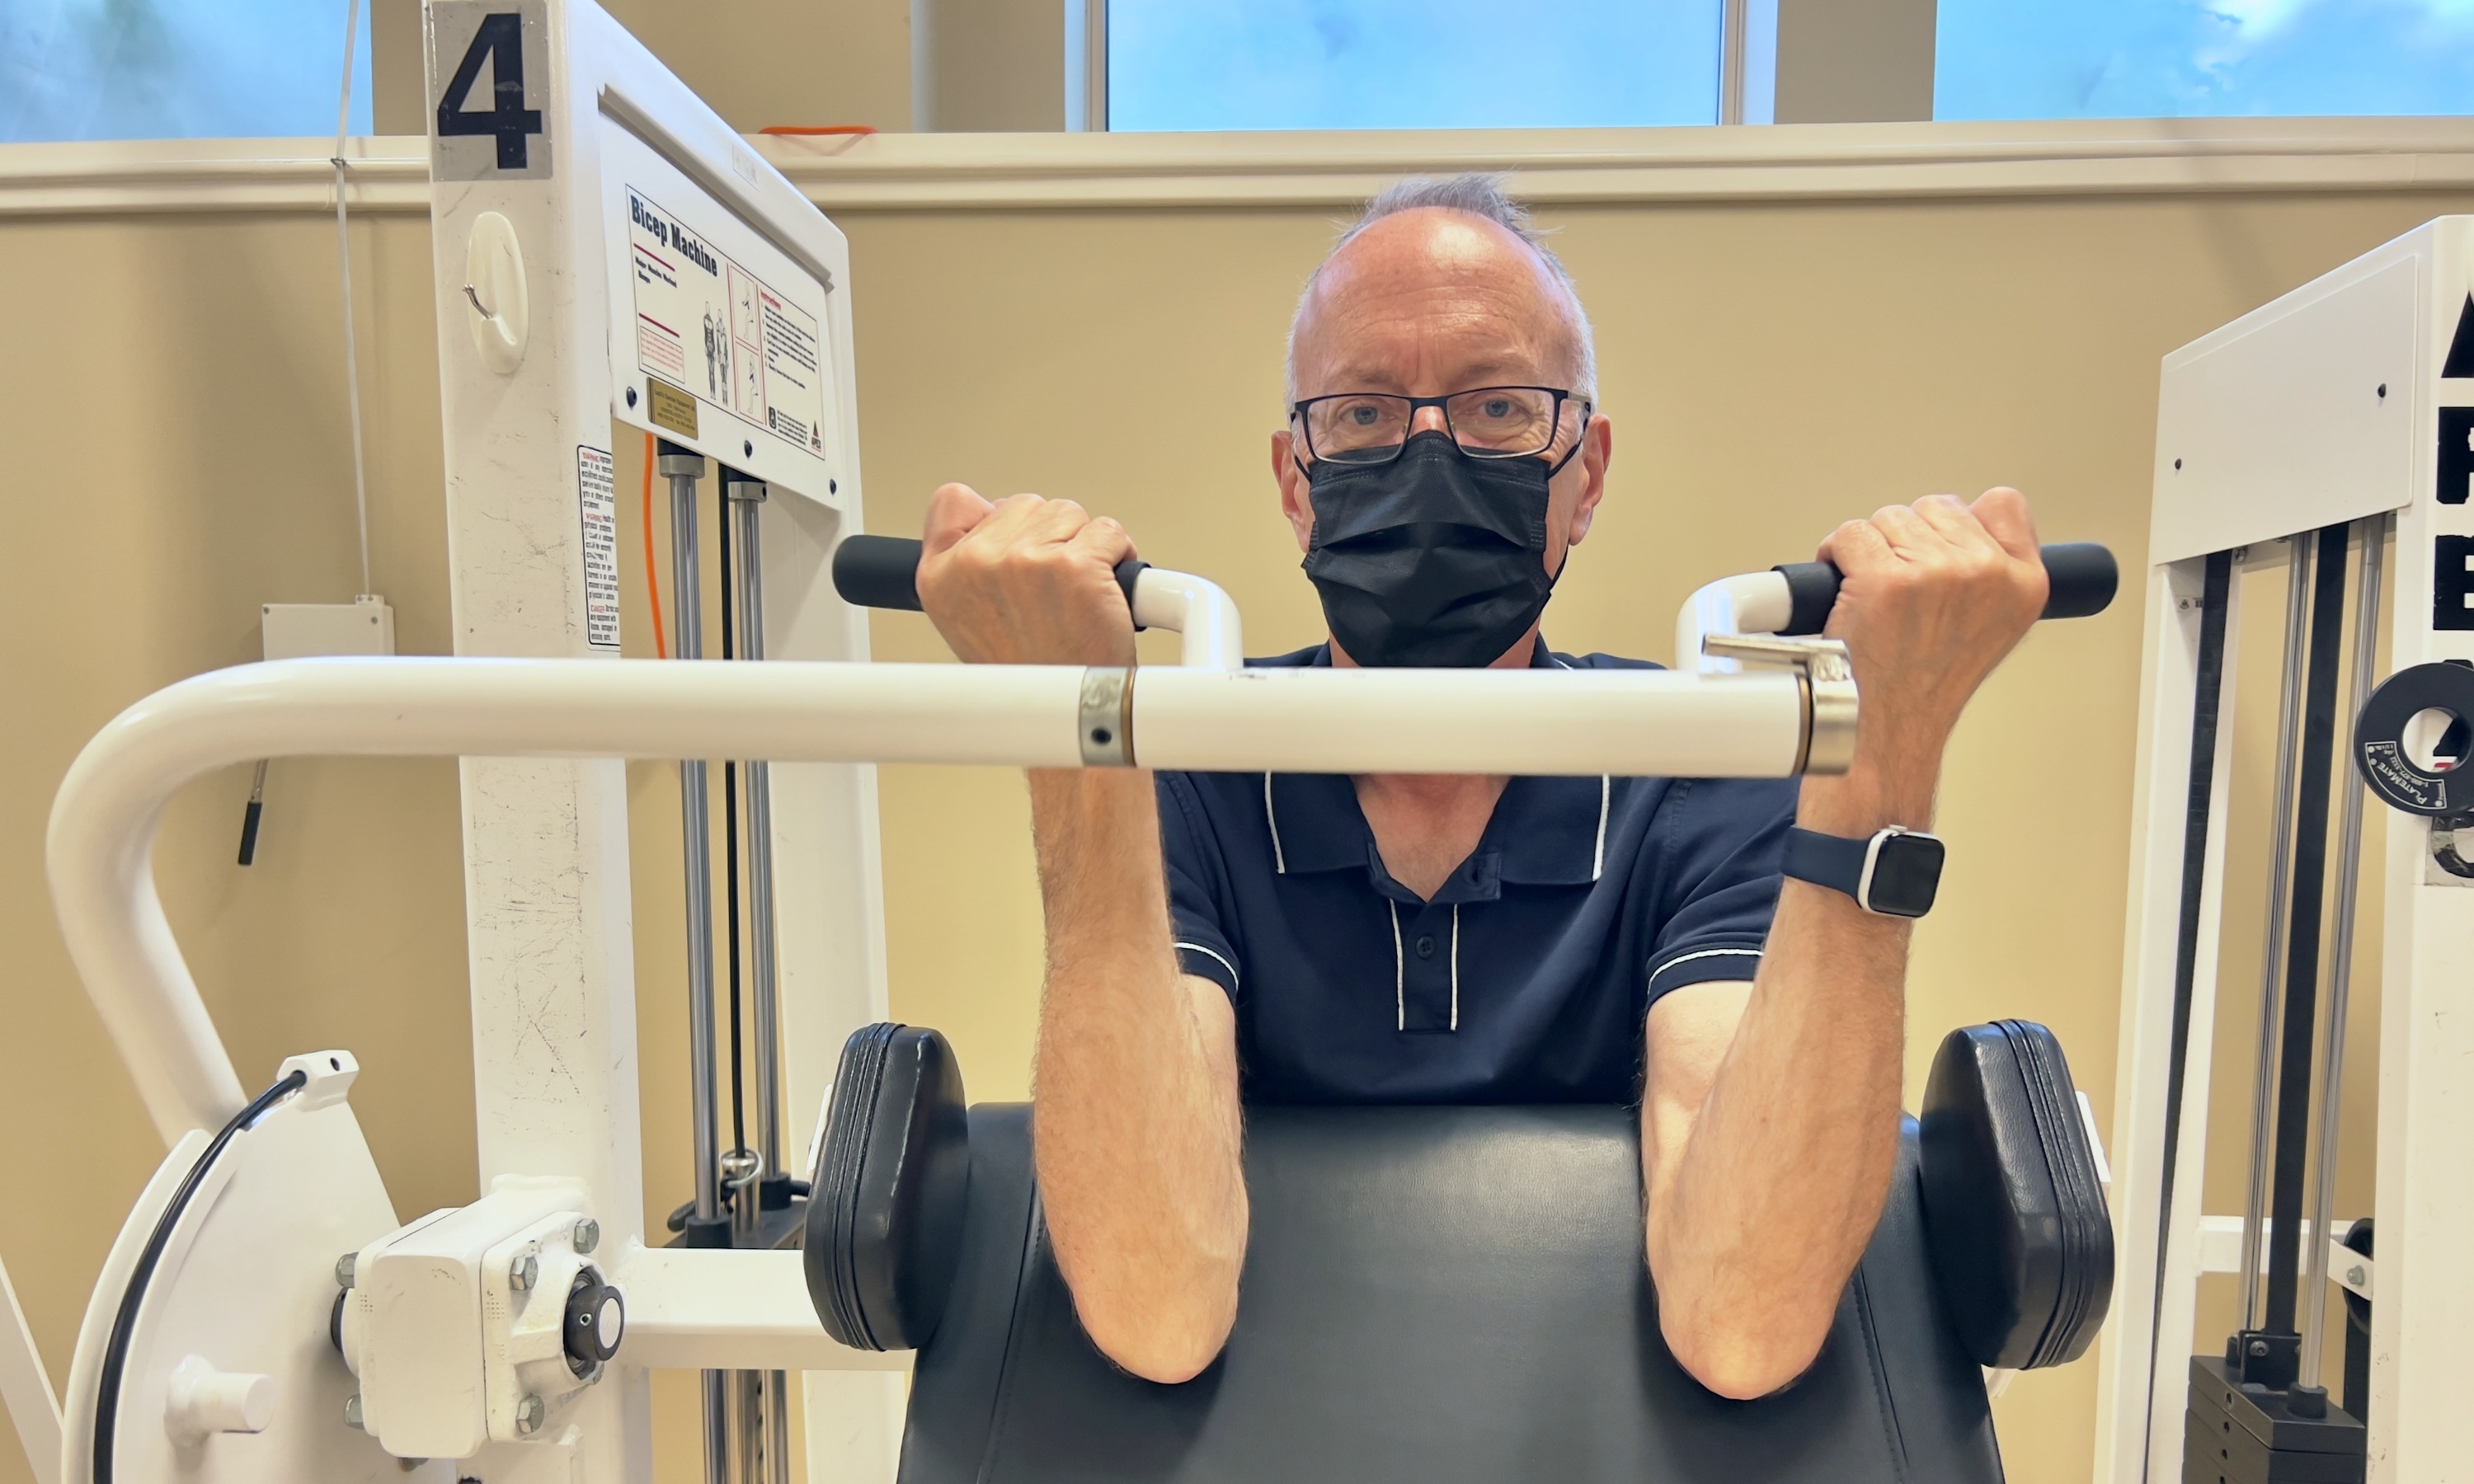 Dave Jamieson works out to build his strength after undergoing treatment for throat cancer. The well-known sports broadcaster says taking part in a U of A study on exercise for cancer survivors has changed his life for the better. (Photo: Nate Lam)